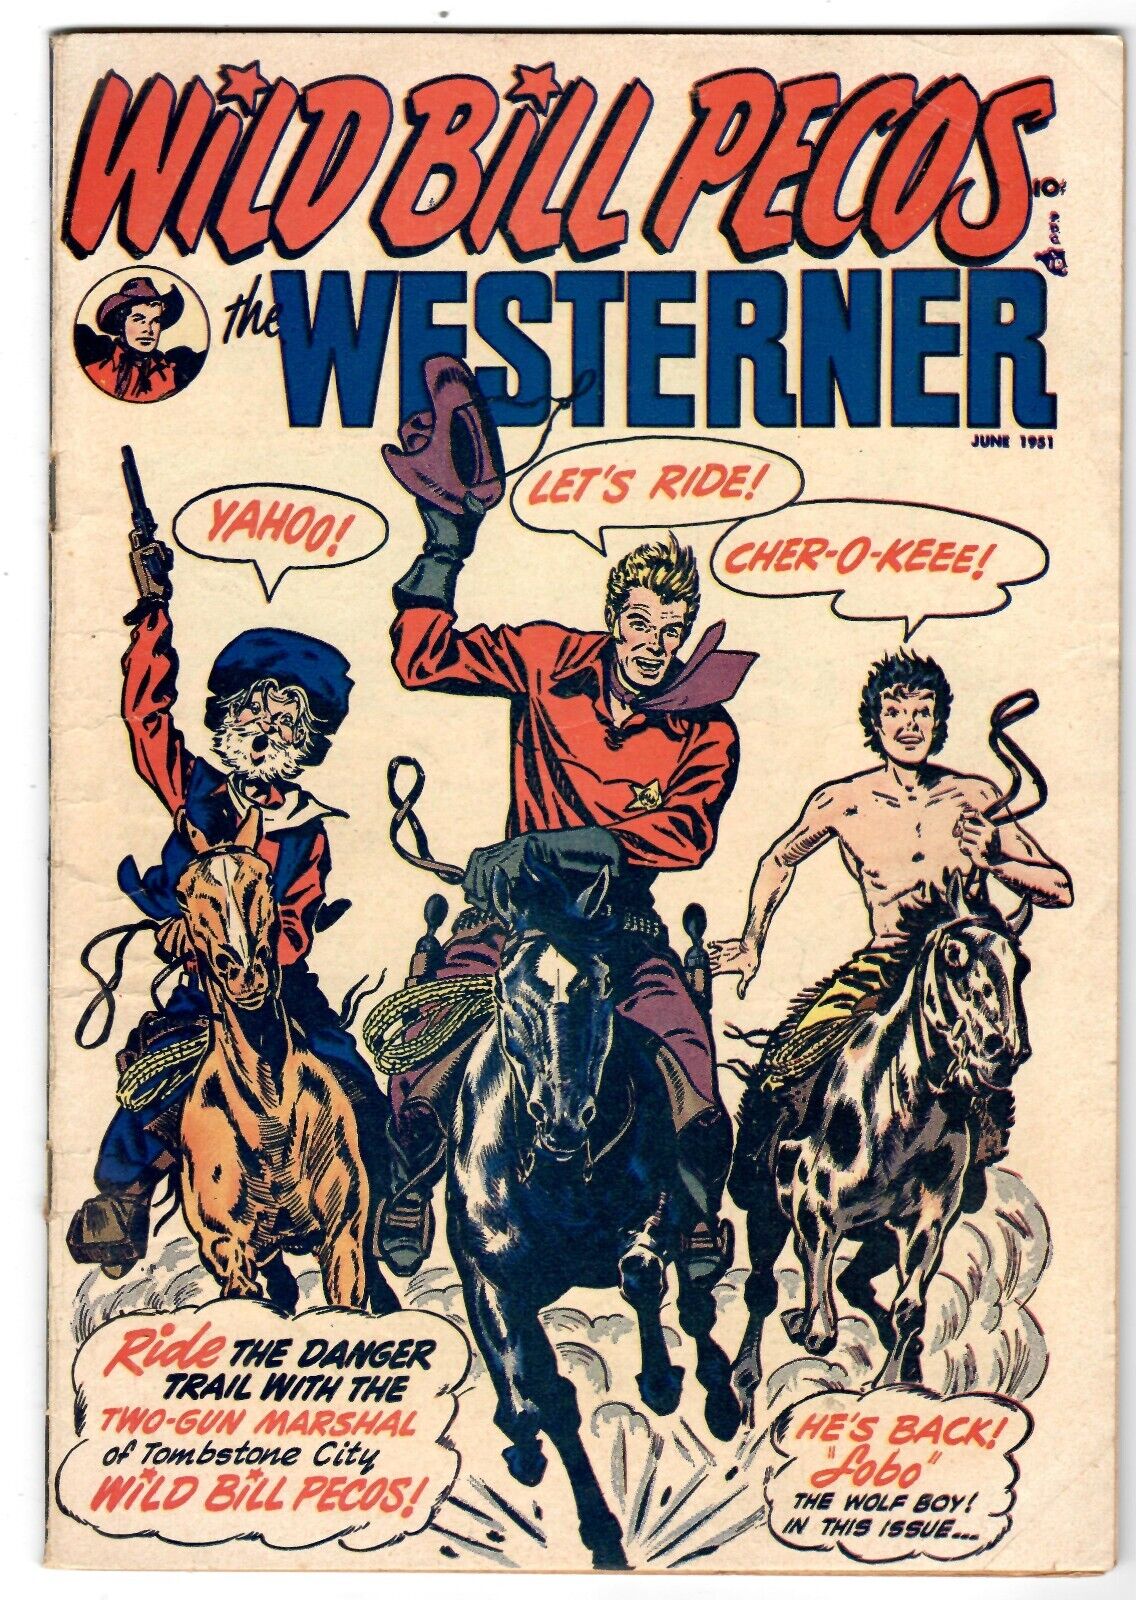 Wild Bill Pecos The Westerner #37 (1951) Wanted Comics Group Very Good to Fine